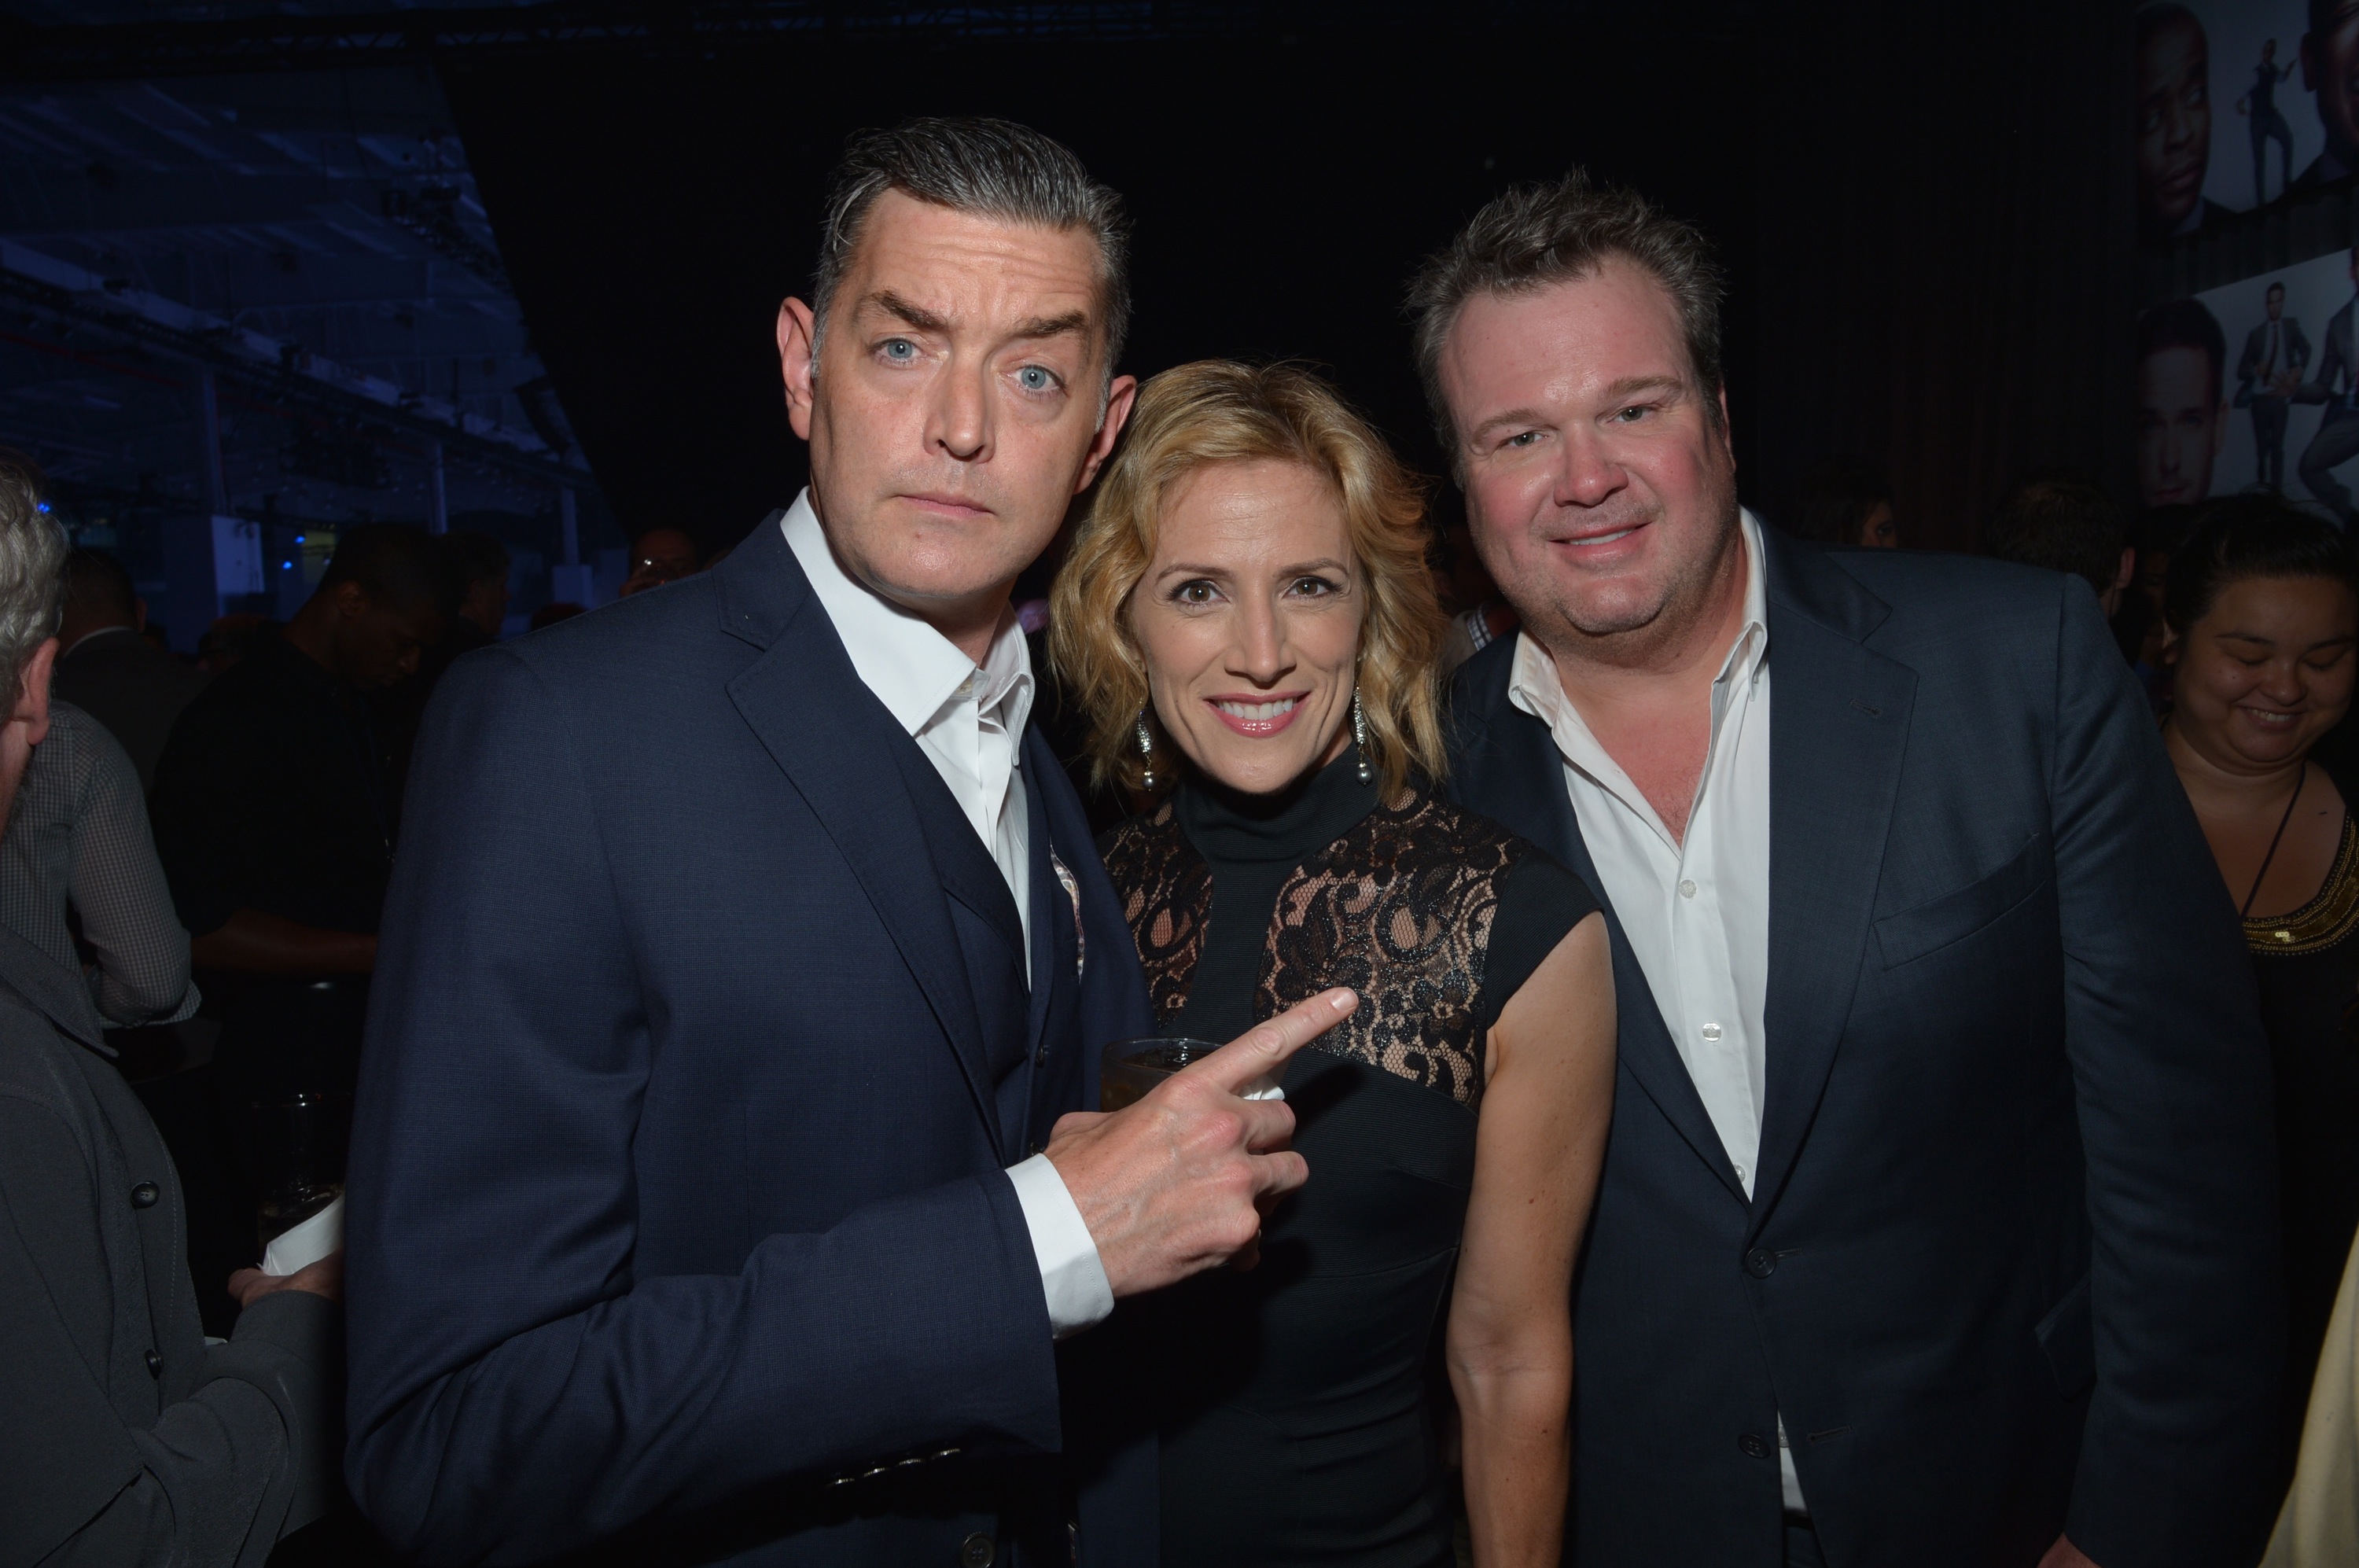 PSYCH's Timothy Omundson, Kirsten Nelson and MODERN FAMILY's Eric Stonestreet at USA Network's 2013 Upfront in NYC